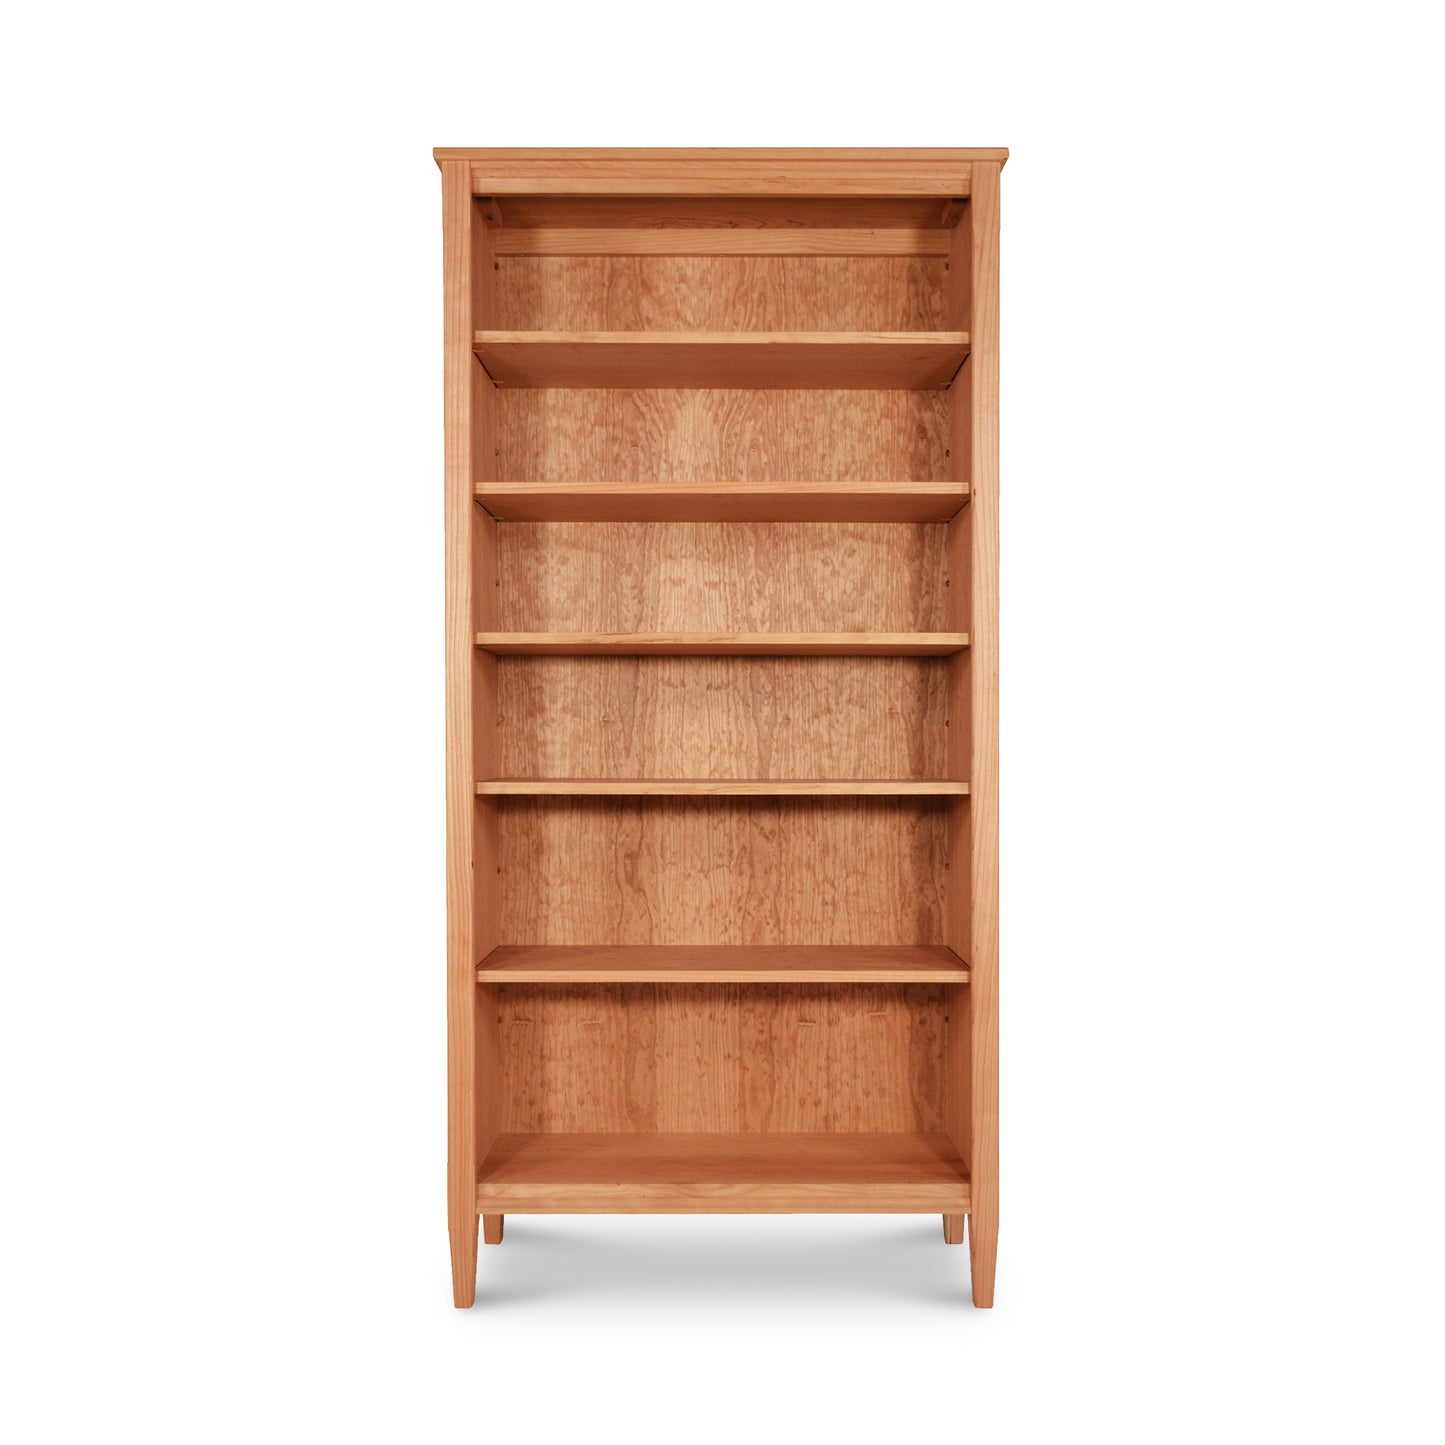 Wooden bookshelf with five shelves, empty and standing against a plain white background from the Maple Corner Woodworks Vermont Shaker Bookcase collection.